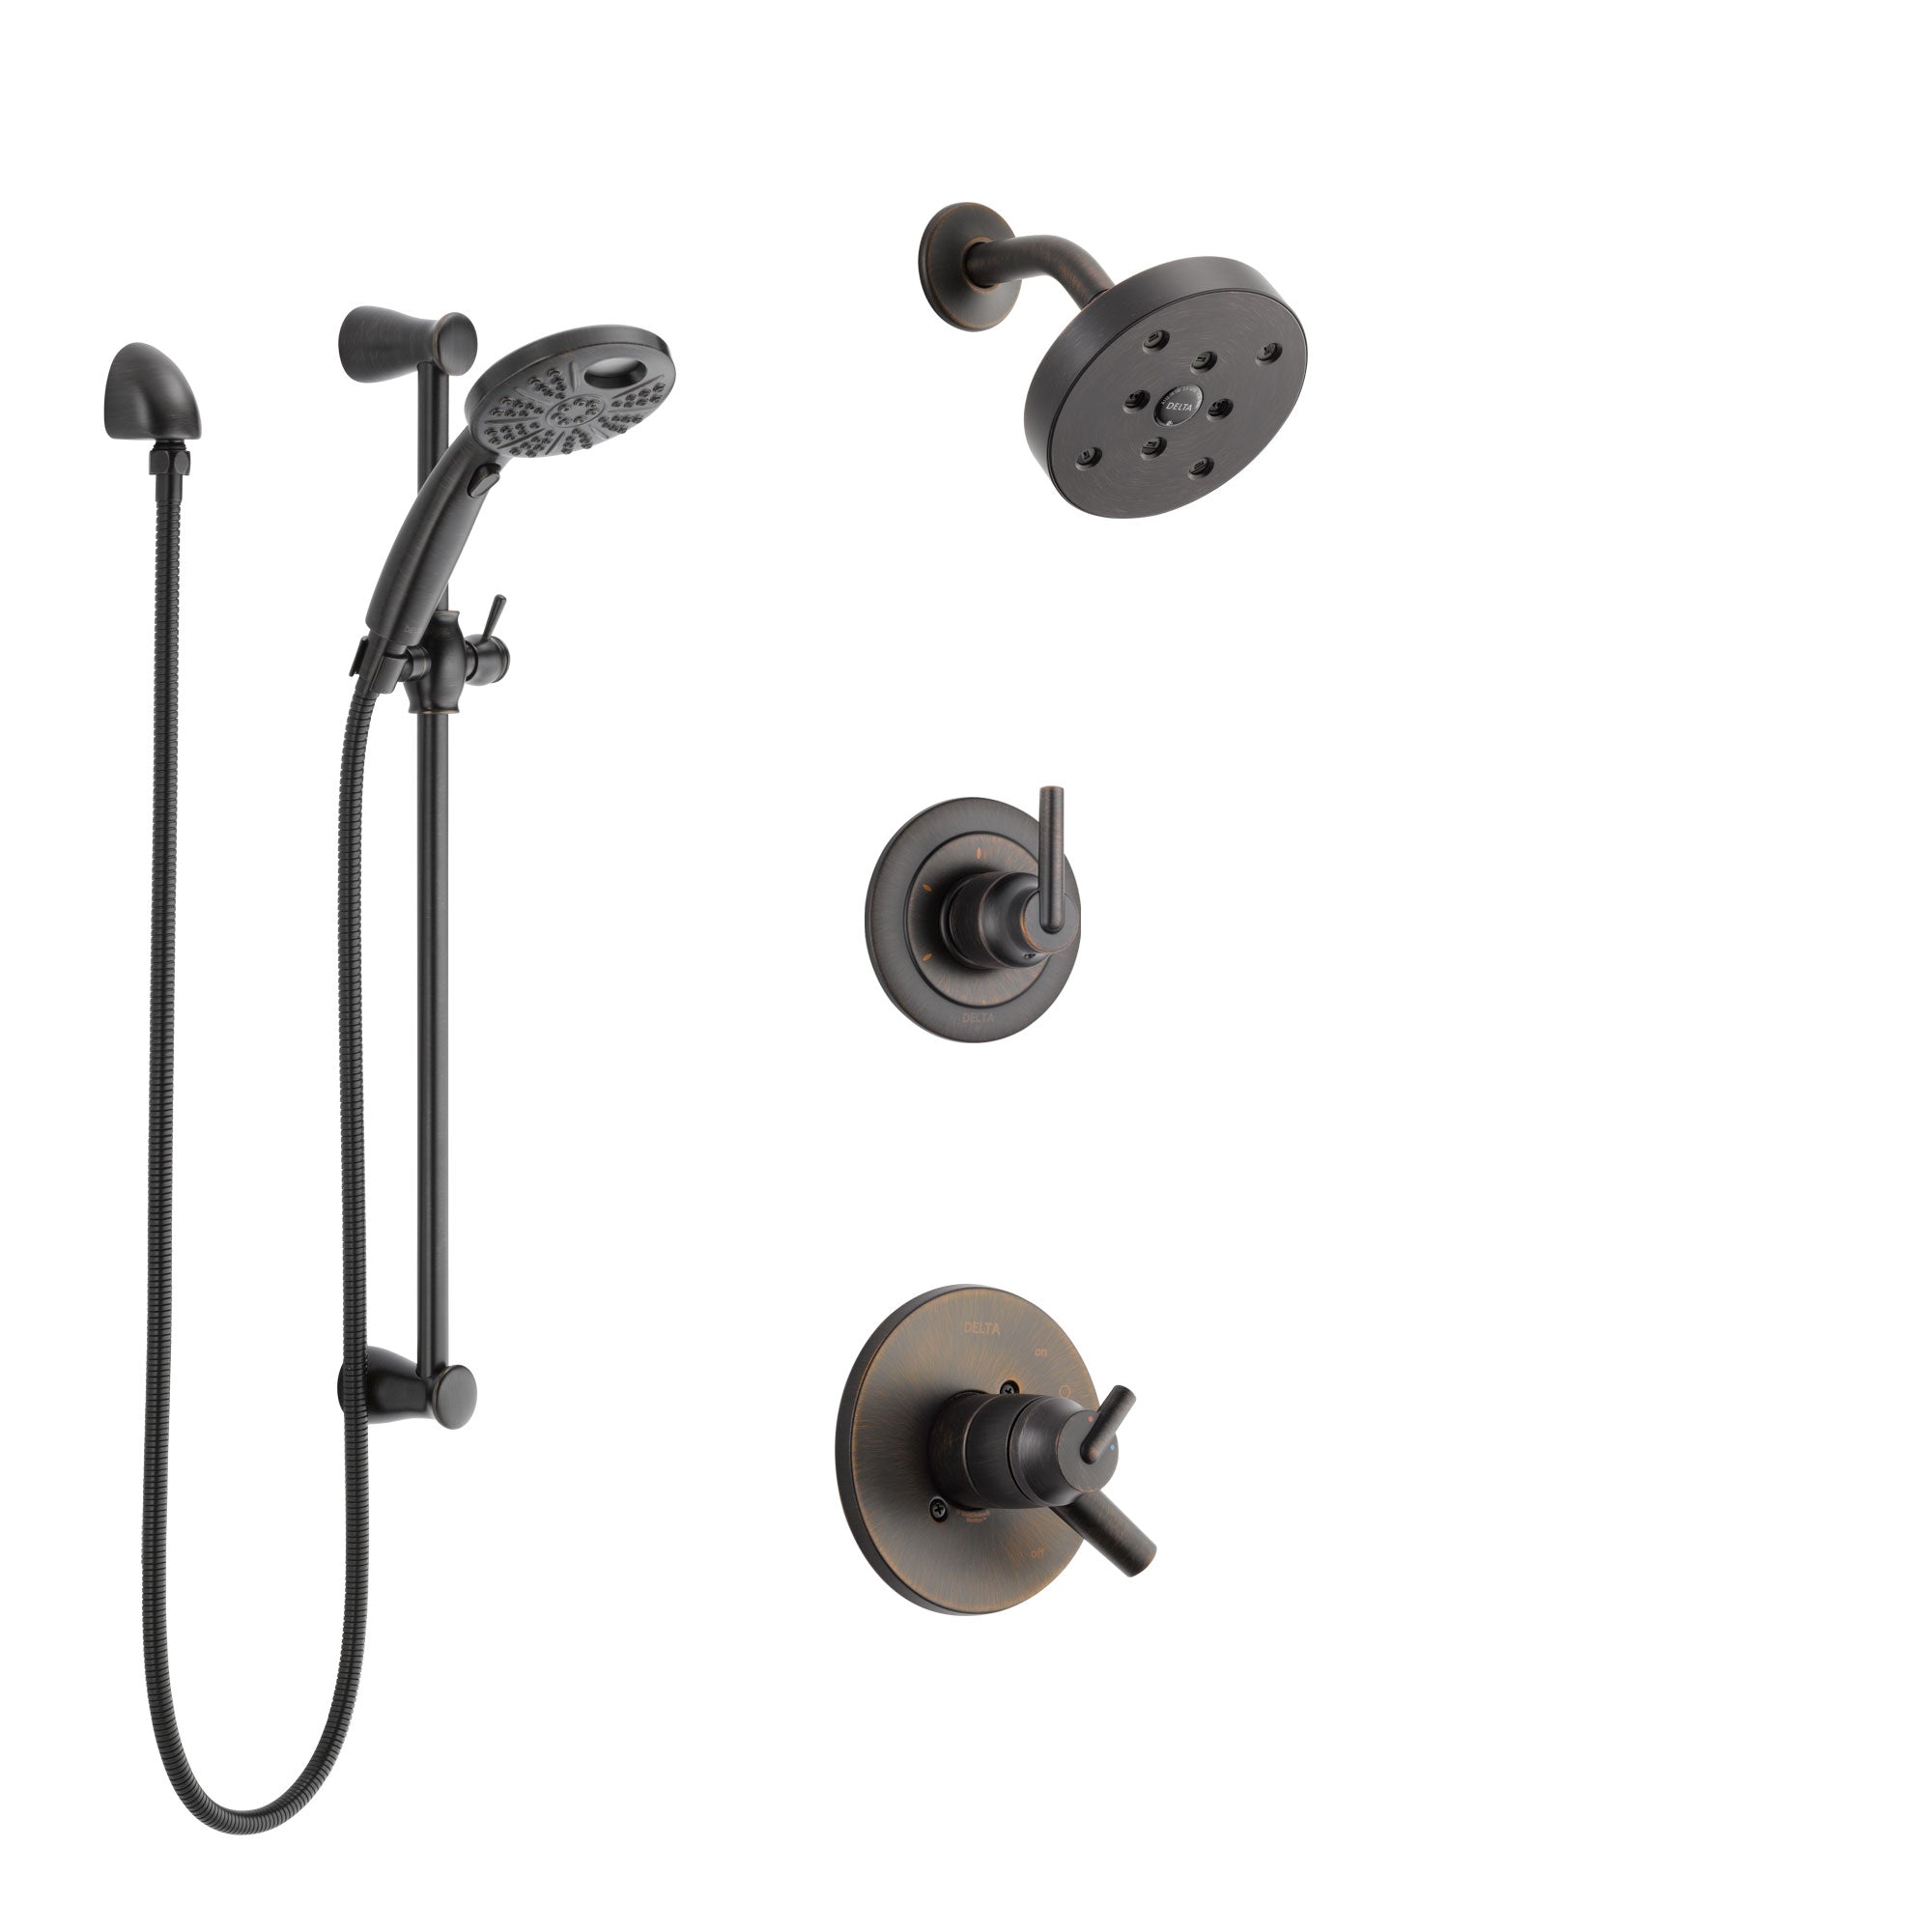 Delta Trinsic Venetian Bronze Finish Shower System with Dual Control, 3-Setting Diverter, Showerhead, and Temp2O Hand Shower with Slidebar SS17259RB4